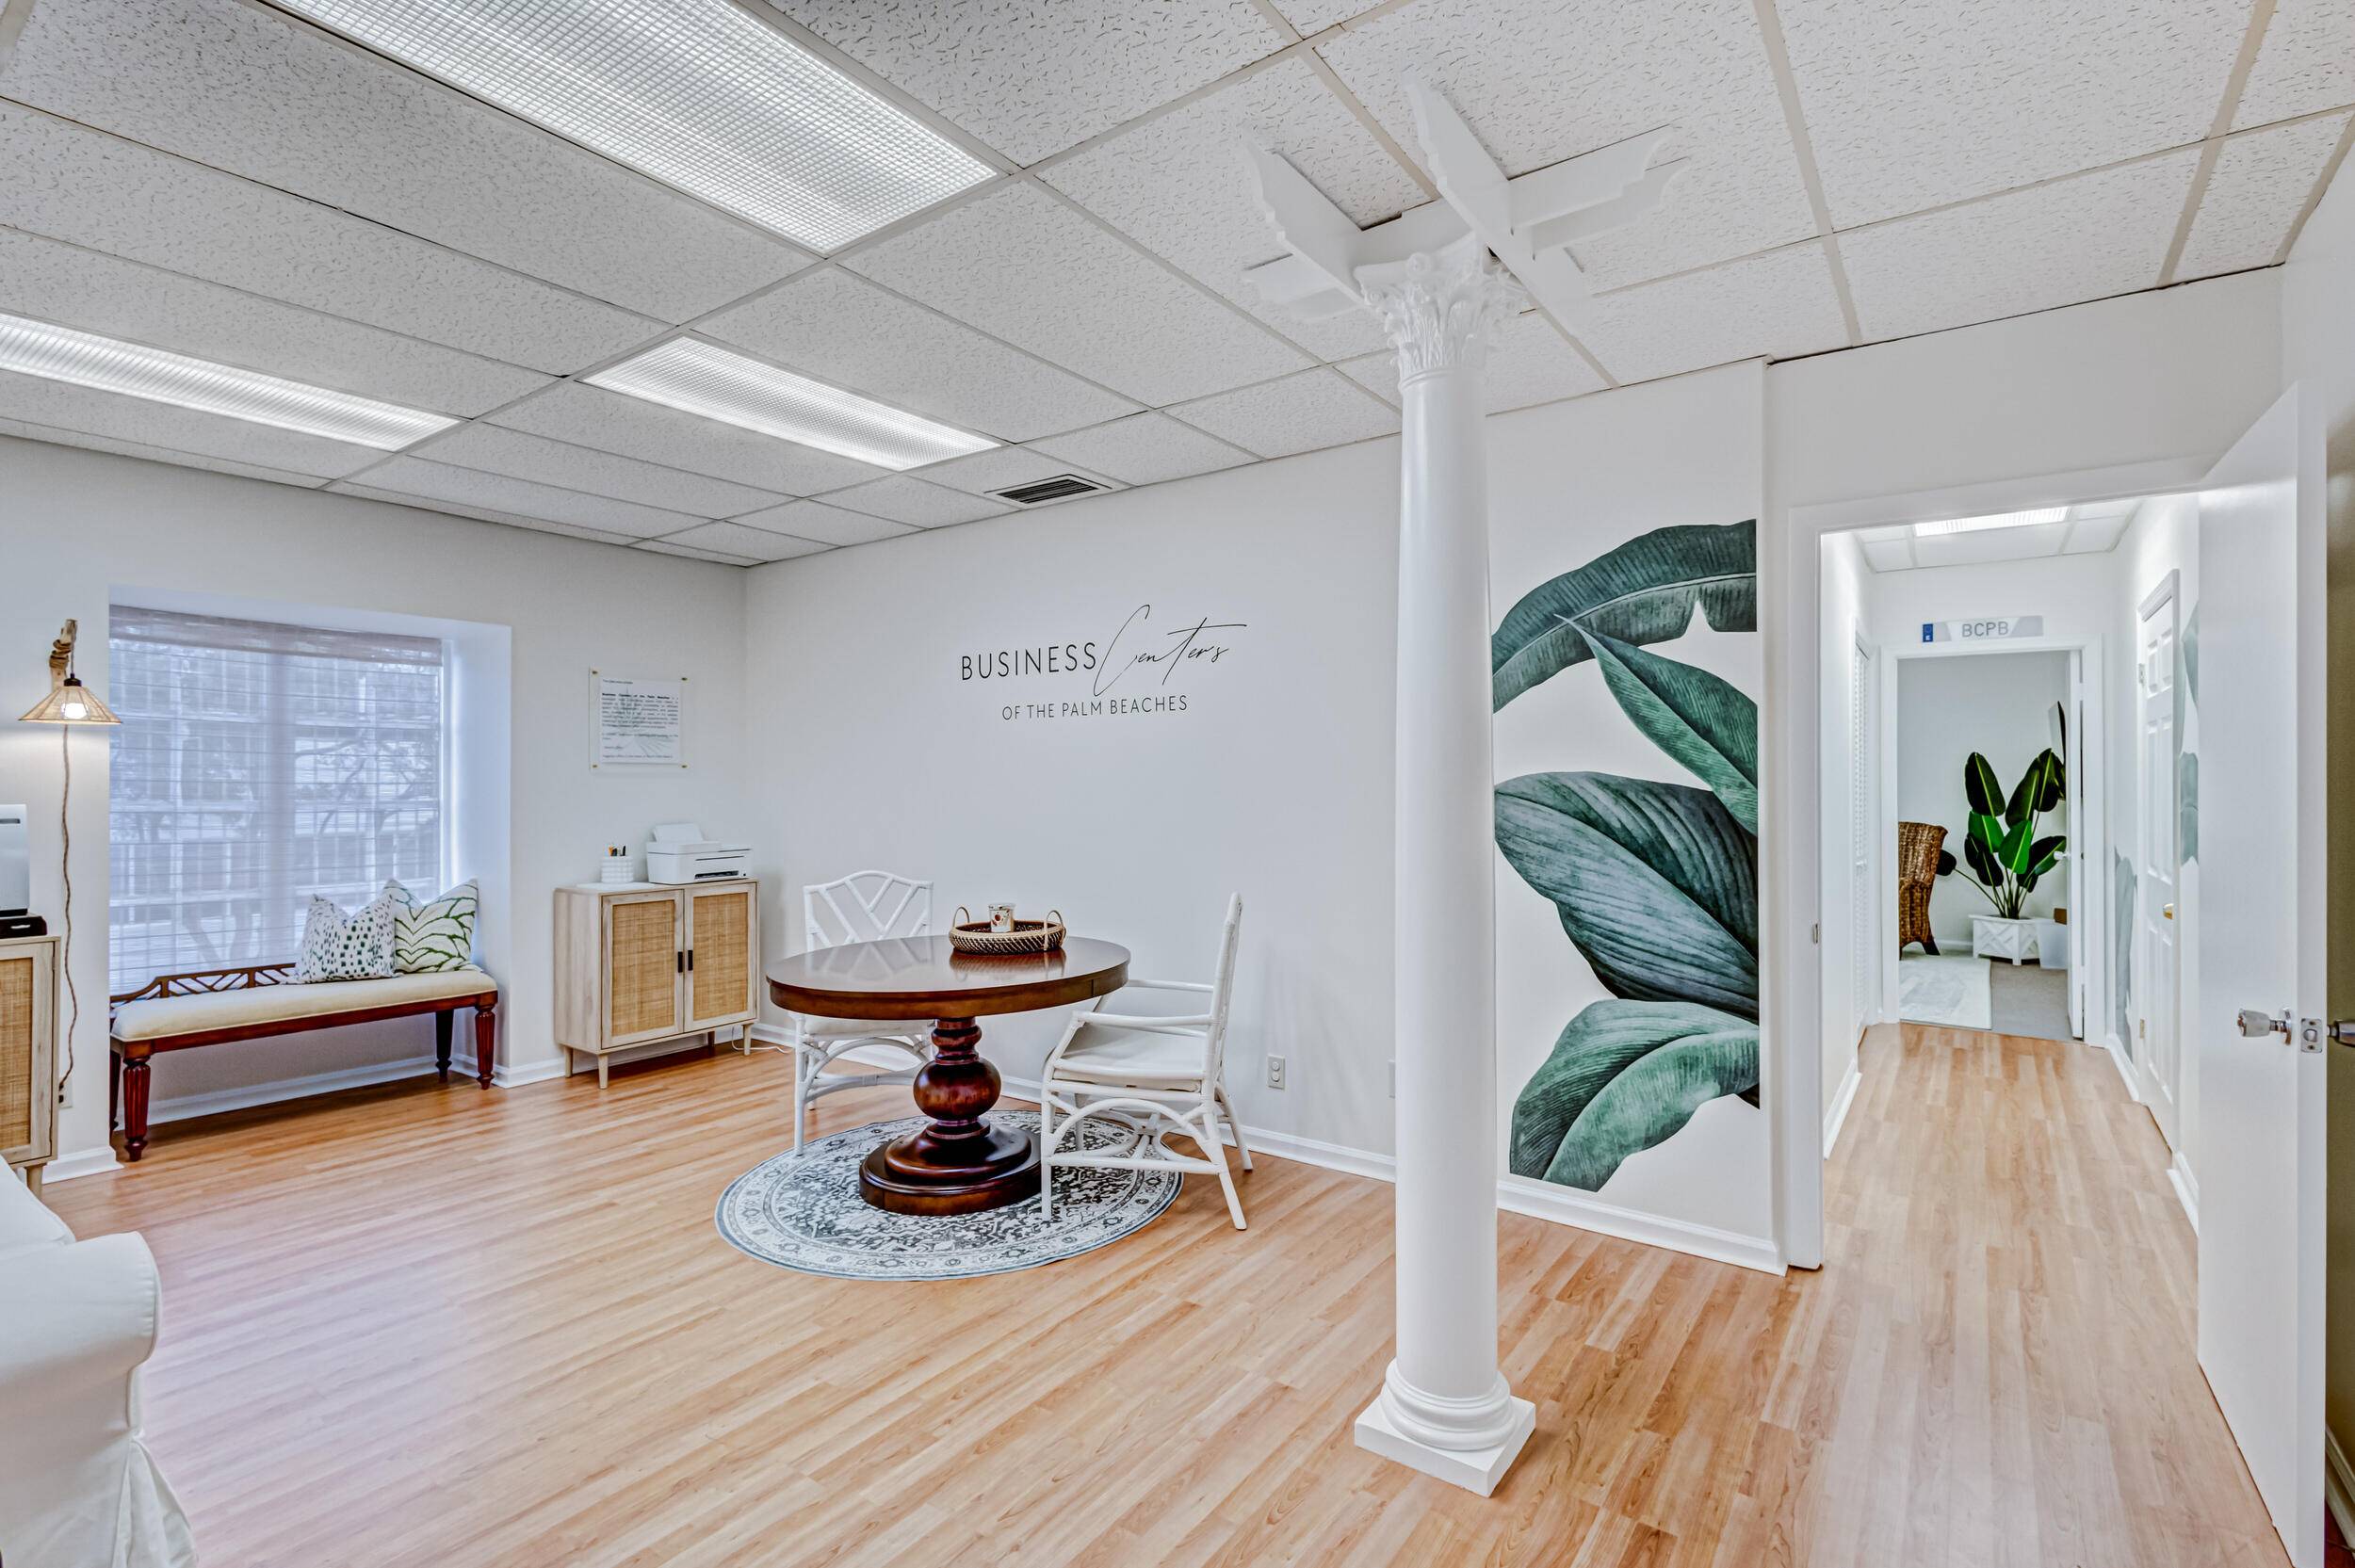 Office space available with flexible terms can use full time, Seasonal, or as Coworking space Perfect for independent contractors and remote workers needing out of the home space.